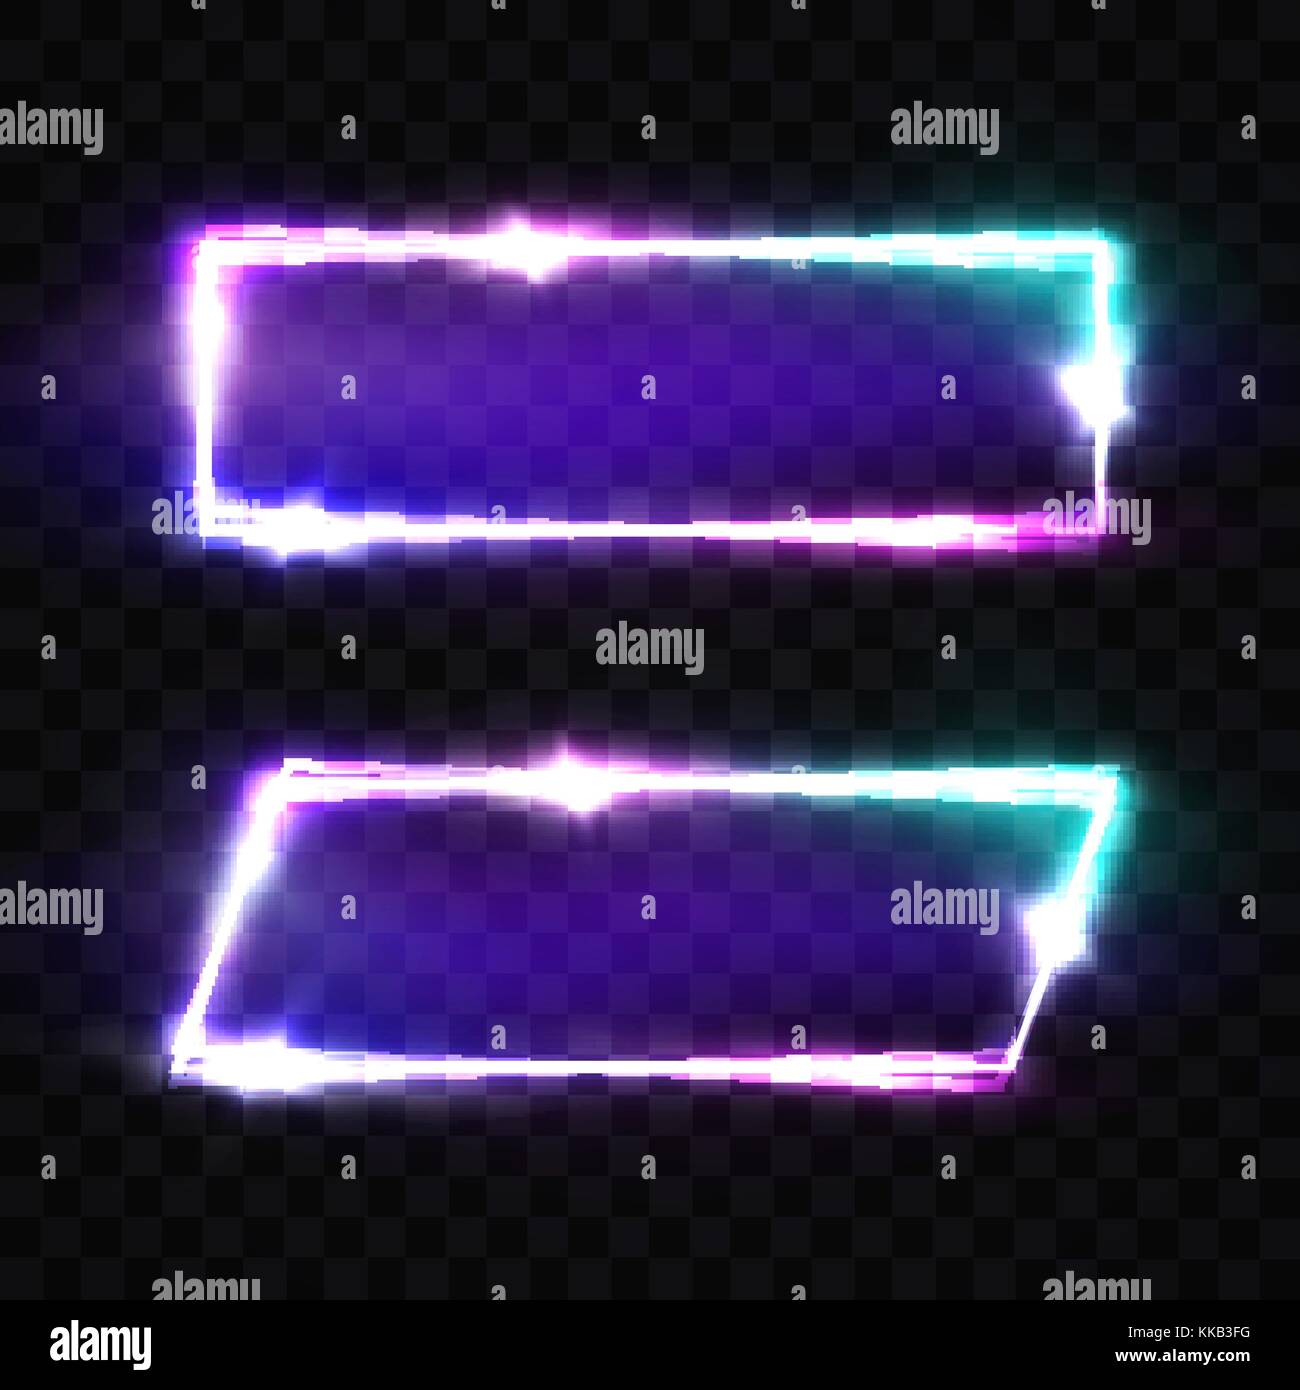 Night Club Neon Signs Set. Blank 3d Retro Light Background With Shining Neon Effect. Techno Frame With Glow On Transparent Backdrop. Electric Street Banner. Colorful Vector Illustration in 80s Style. Stock Vector